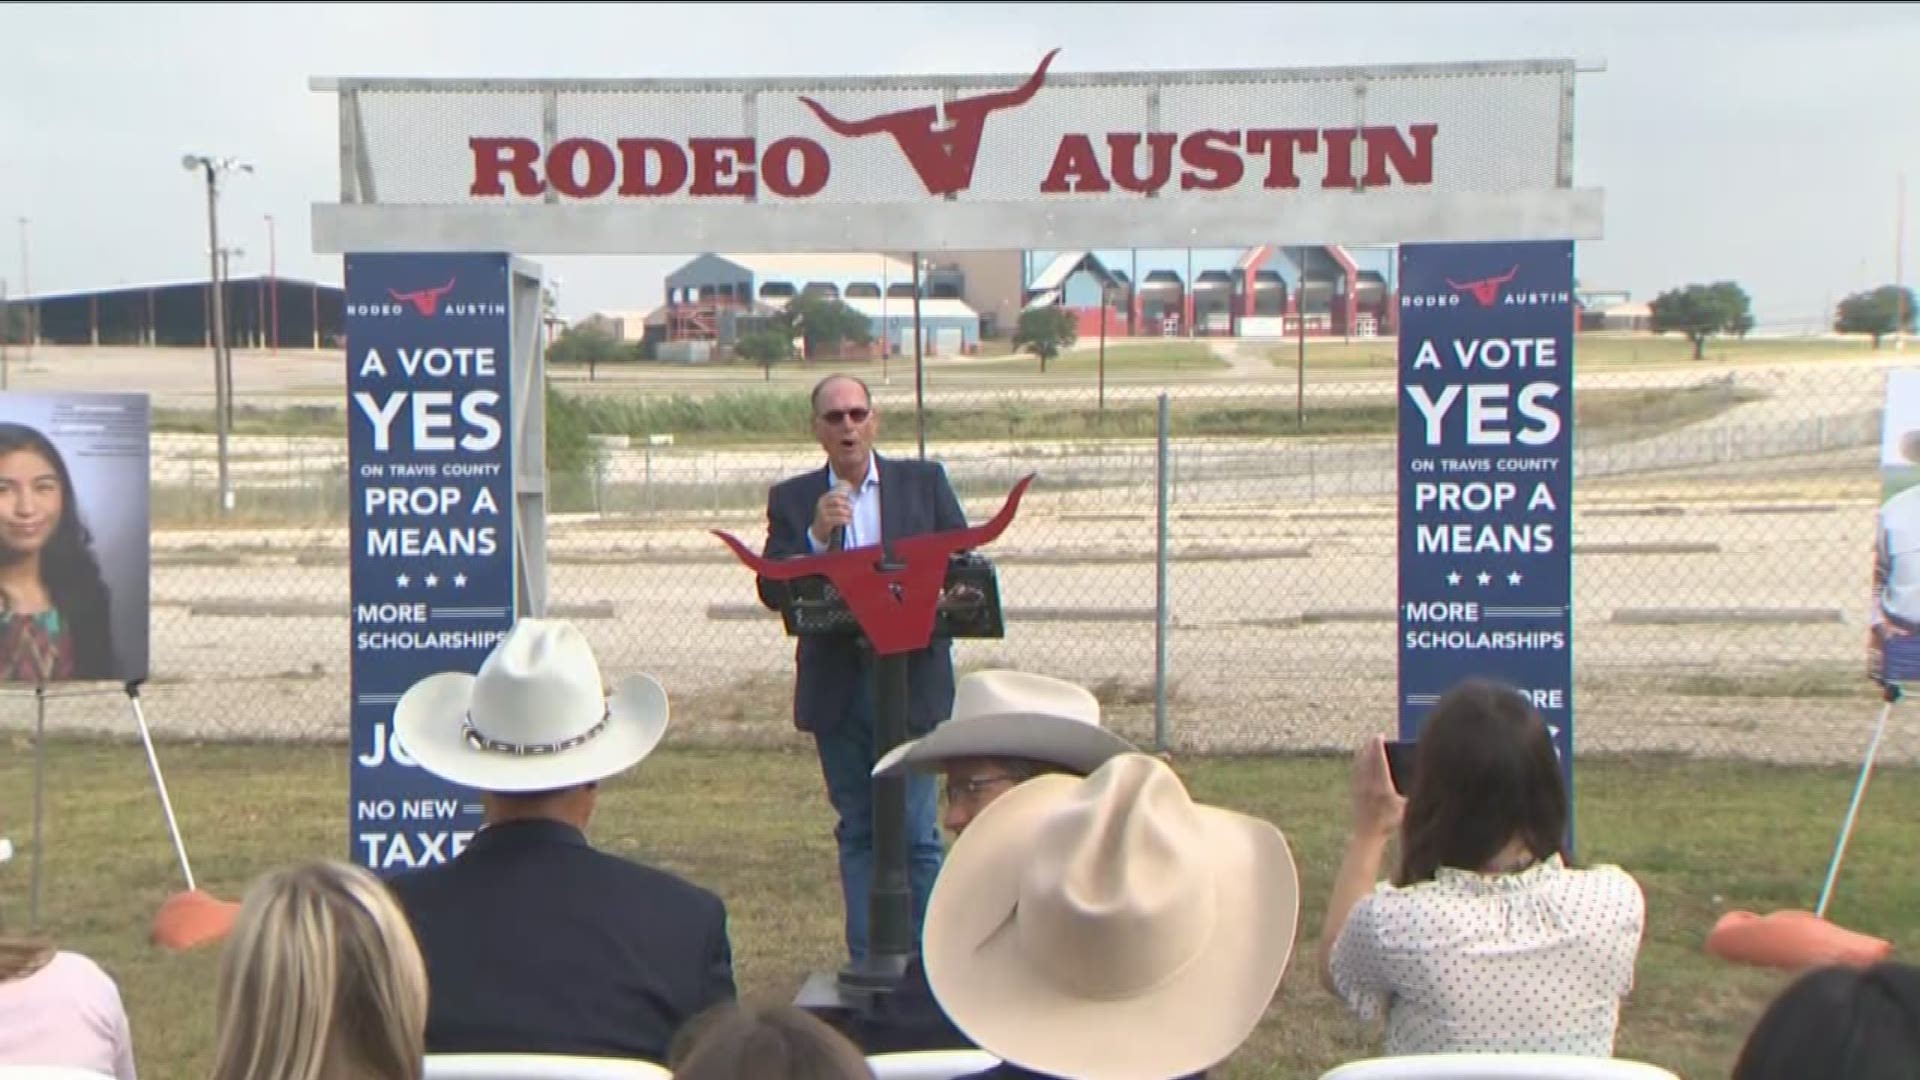 Rodeo Austin is endorsing a measure that would make major improvements to where it holds its events.